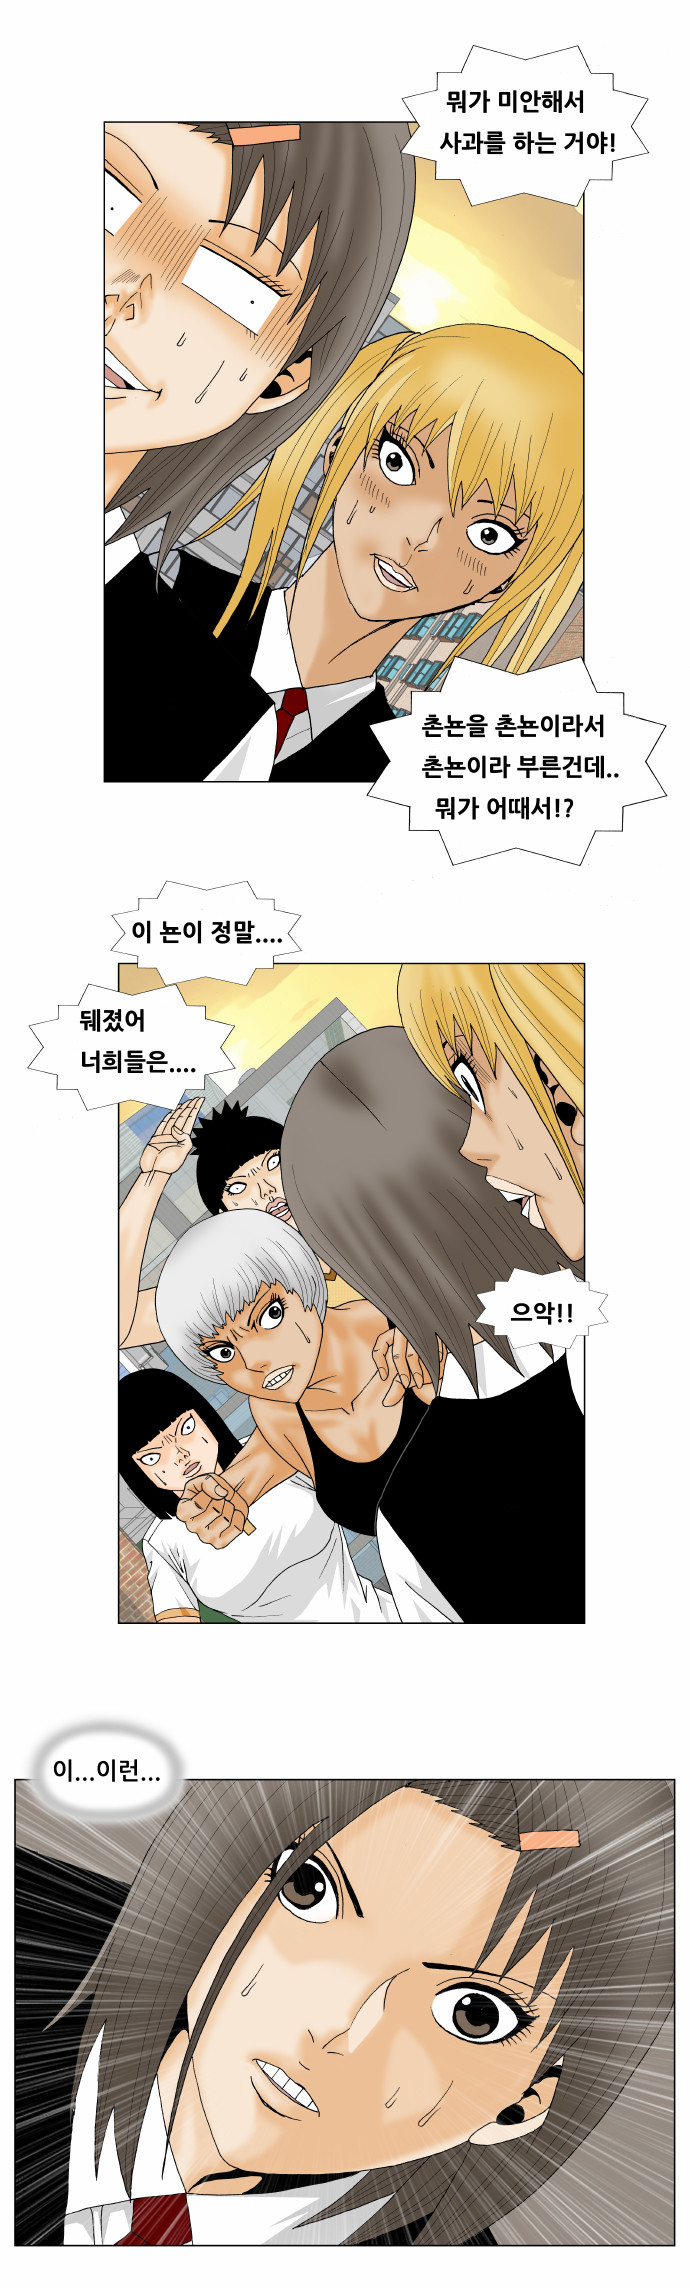 Ultimate Legend - Kang Hae Hyo - Chapter 143 - Page 25